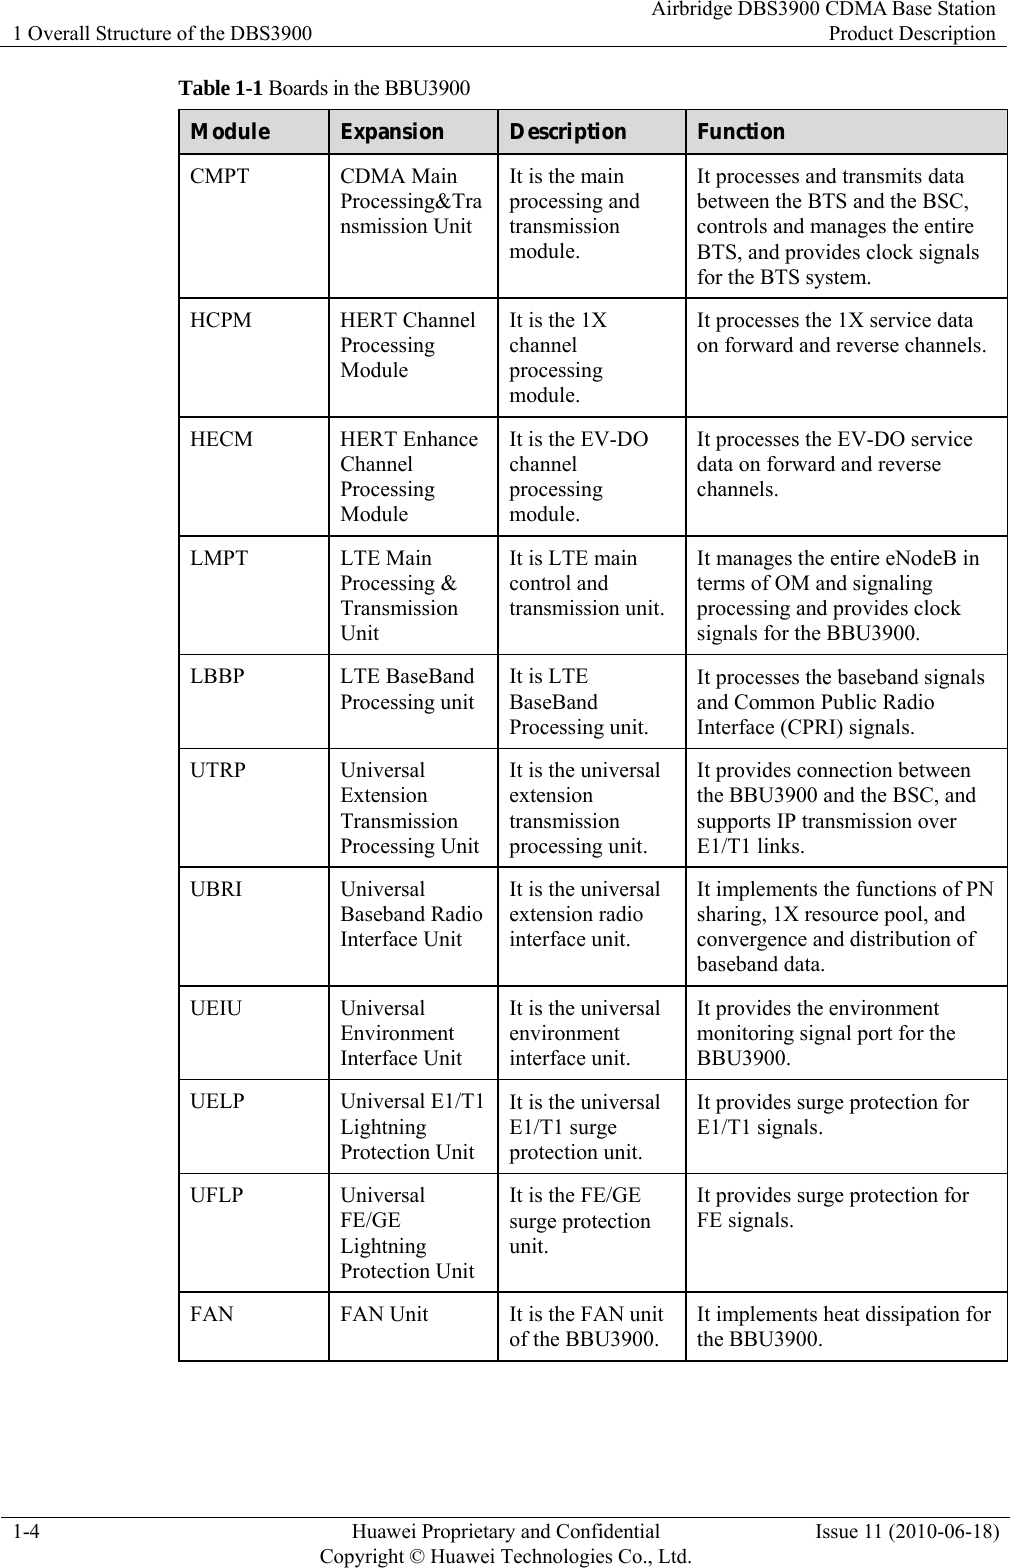 1 Overall Structure of the DBS3900 Airbridge DBS3900 CDMA Base StationProduct Description 1-4  Huawei Proprietary and Confidential     Copyright © Huawei Technologies Co., Ltd.Issue 11 (2010-06-18) Table 1-1 Boards in the BBU3900 Module  Expansion  Description  Function CMPT CDMA Main Processing&amp;Transmission Unit It is the main processing and transmission module. It processes and transmits data between the BTS and the BSC, controls and manages the entire BTS, and provides clock signals for the BTS system. HCPM HERT Channel Processing Module It is the 1X channel processing module. It processes the 1X service data on forward and reverse channels. HECM HERT Enhance Channel Processing Module It is the EV-DO channel processing module. It processes the EV-DO service data on forward and reverse channels. LMPT LTE Main Processing &amp; Transmission Unit It is LTE main control and transmission unit. It manages the entire eNodeB in terms of OM and signaling processing and provides clock signals for the BBU3900. LBBP LTE BaseBand Processing unit It is LTE BaseBand Processing unit. It processes the baseband signals and Common Public Radio Interface (CPRI) signals. UTRP Universal Extension Transmission Processing UnitIt is the universal extension transmission processing unit. It provides connection between the BBU3900 and the BSC, and supports IP transmission over E1/T1 links. UBRI Universal Baseband Radio Interface Unit It is the universal extension radio interface unit. It implements the functions of PN sharing, 1X resource pool, and convergence and distribution of baseband data. UEIU Universal Environment Interface Unit It is the universal environment interface unit. It provides the environment monitoring signal port for the BBU3900. UELP Universal E1/T1 Lightning Protection Unit It is the universal E1/T1 surge protection unit. It provides surge protection for E1/T1 signals. UFLP Universal FE/GE Lightning Protection Unit It is the FE/GE surge protection unit. It provides surge protection for FE signals. FAN  FAN Unit  It is the FAN unit of the BBU3900. It implements heat dissipation for the BBU3900. 